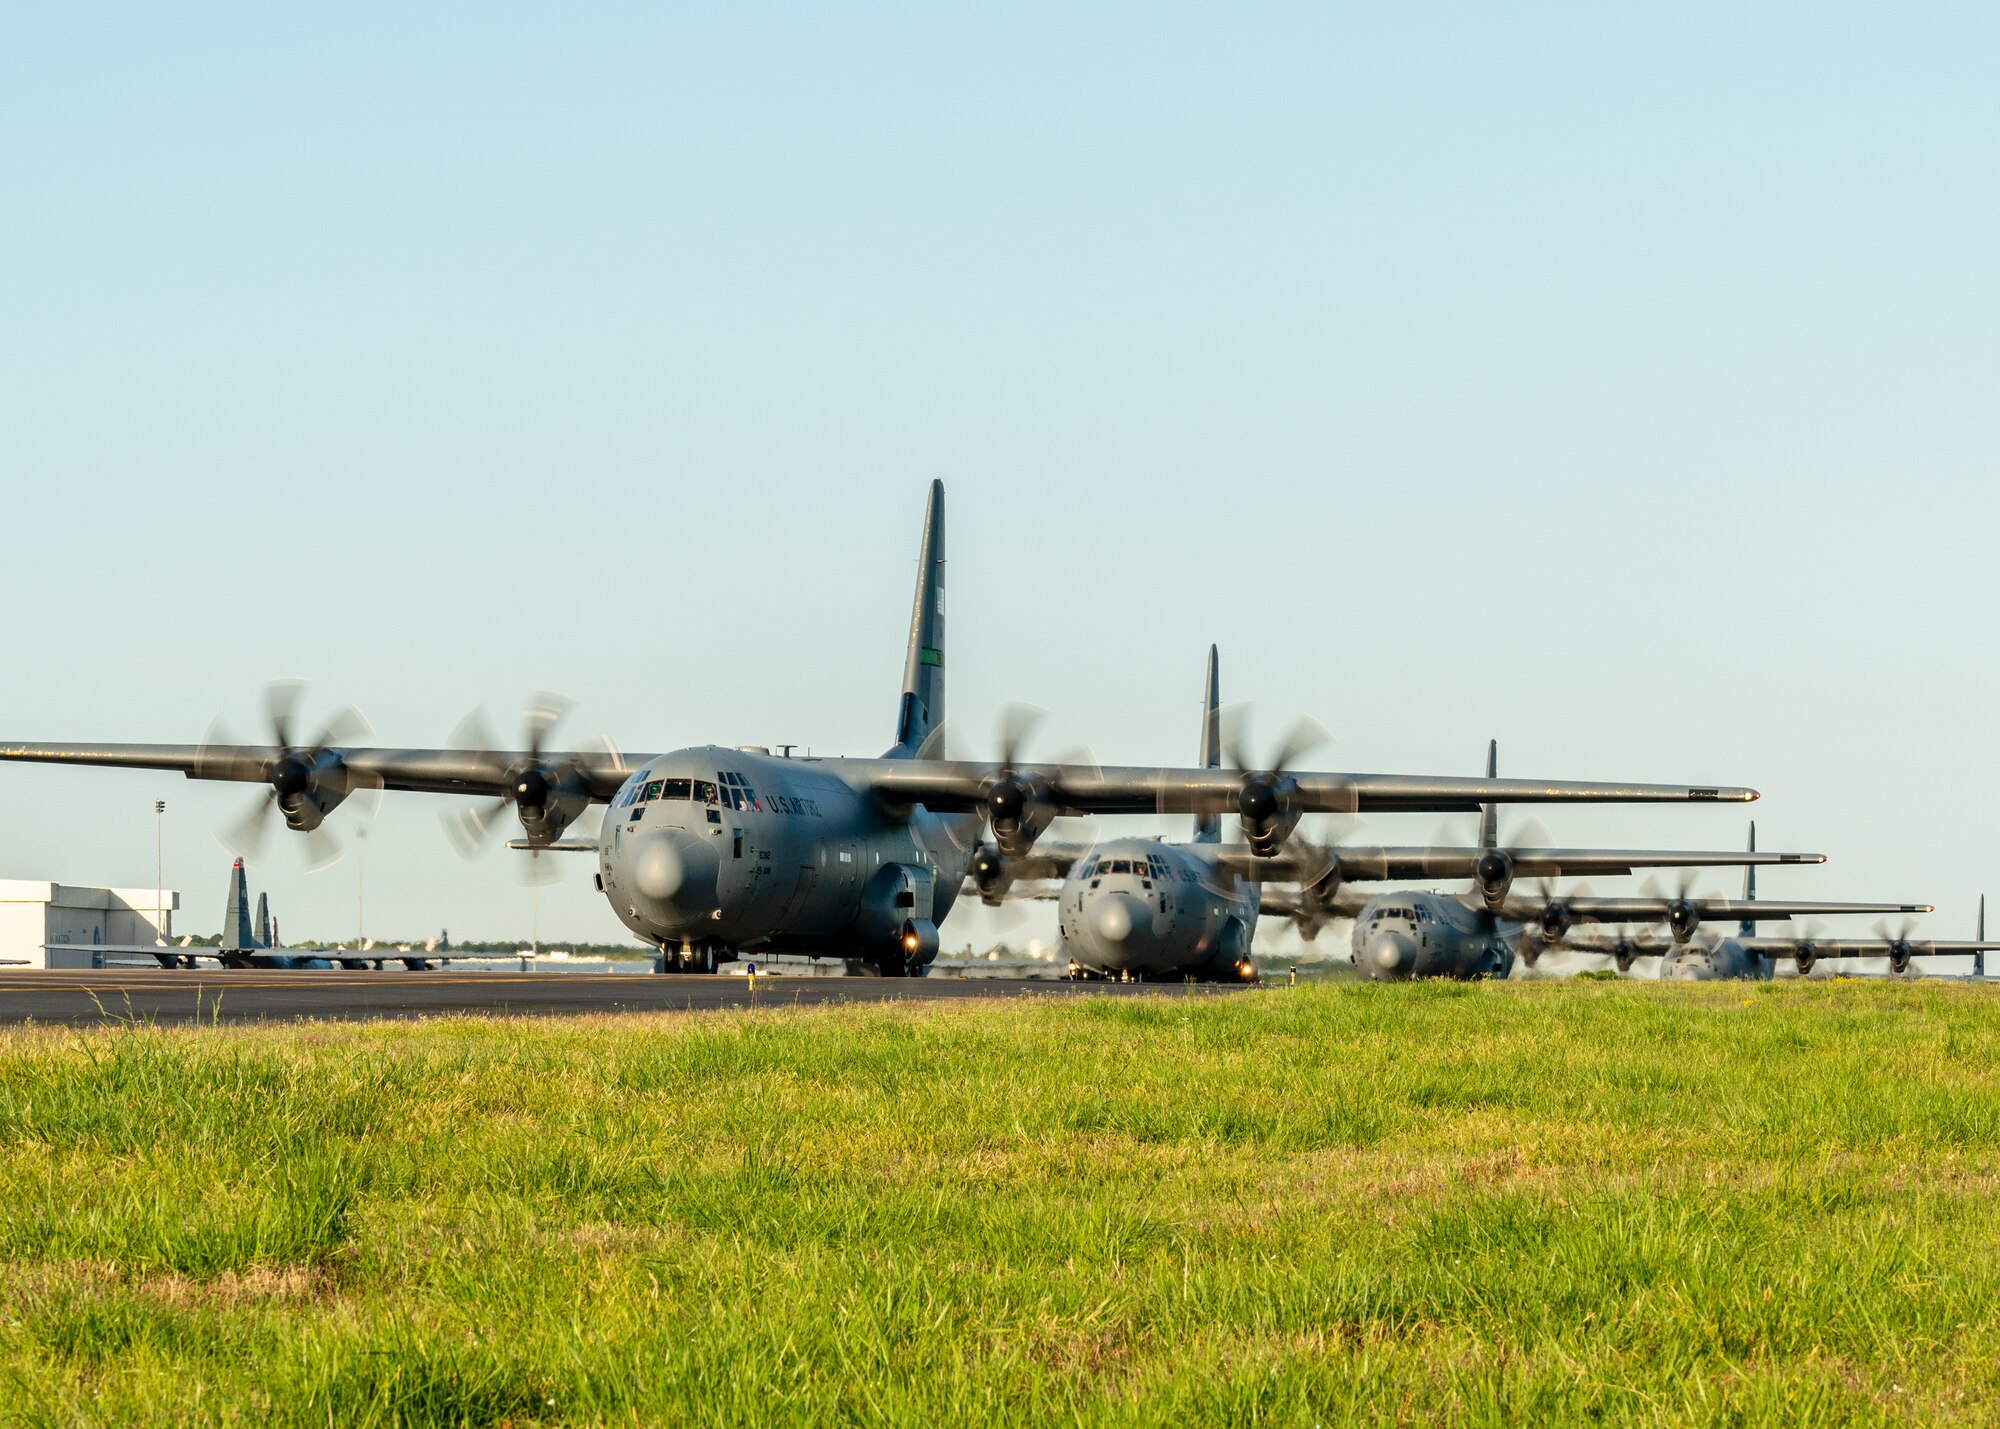 U.S. Air Force C-130J Super Hercules line up on the taxi way as part of an 11-ship formation from Little Rock Air Force Base, Ark., April 15. 2021. The elephant walk quickly launched combat airlift to support an U.S. Army Joint Readiness Training event. (U.S. Air Force photo by Maj. Ashley Walker)